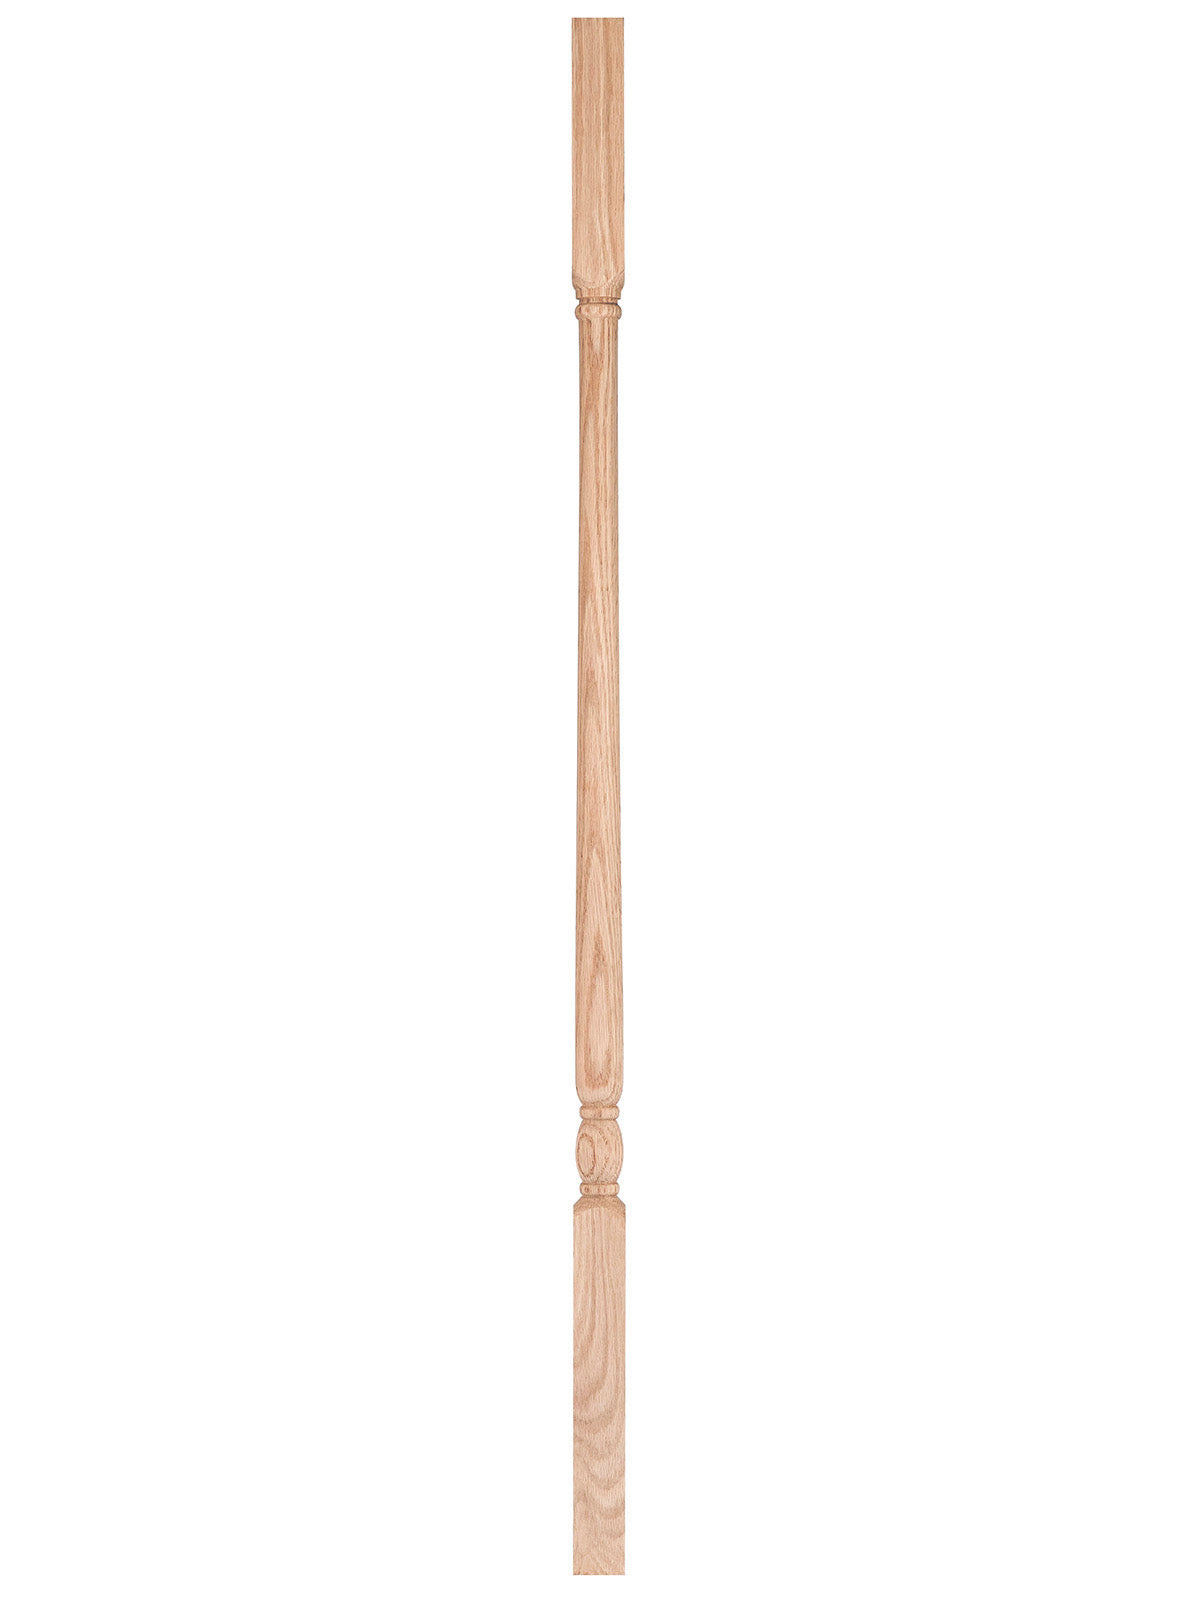 Baluster Colonial 5141 (Square Top)